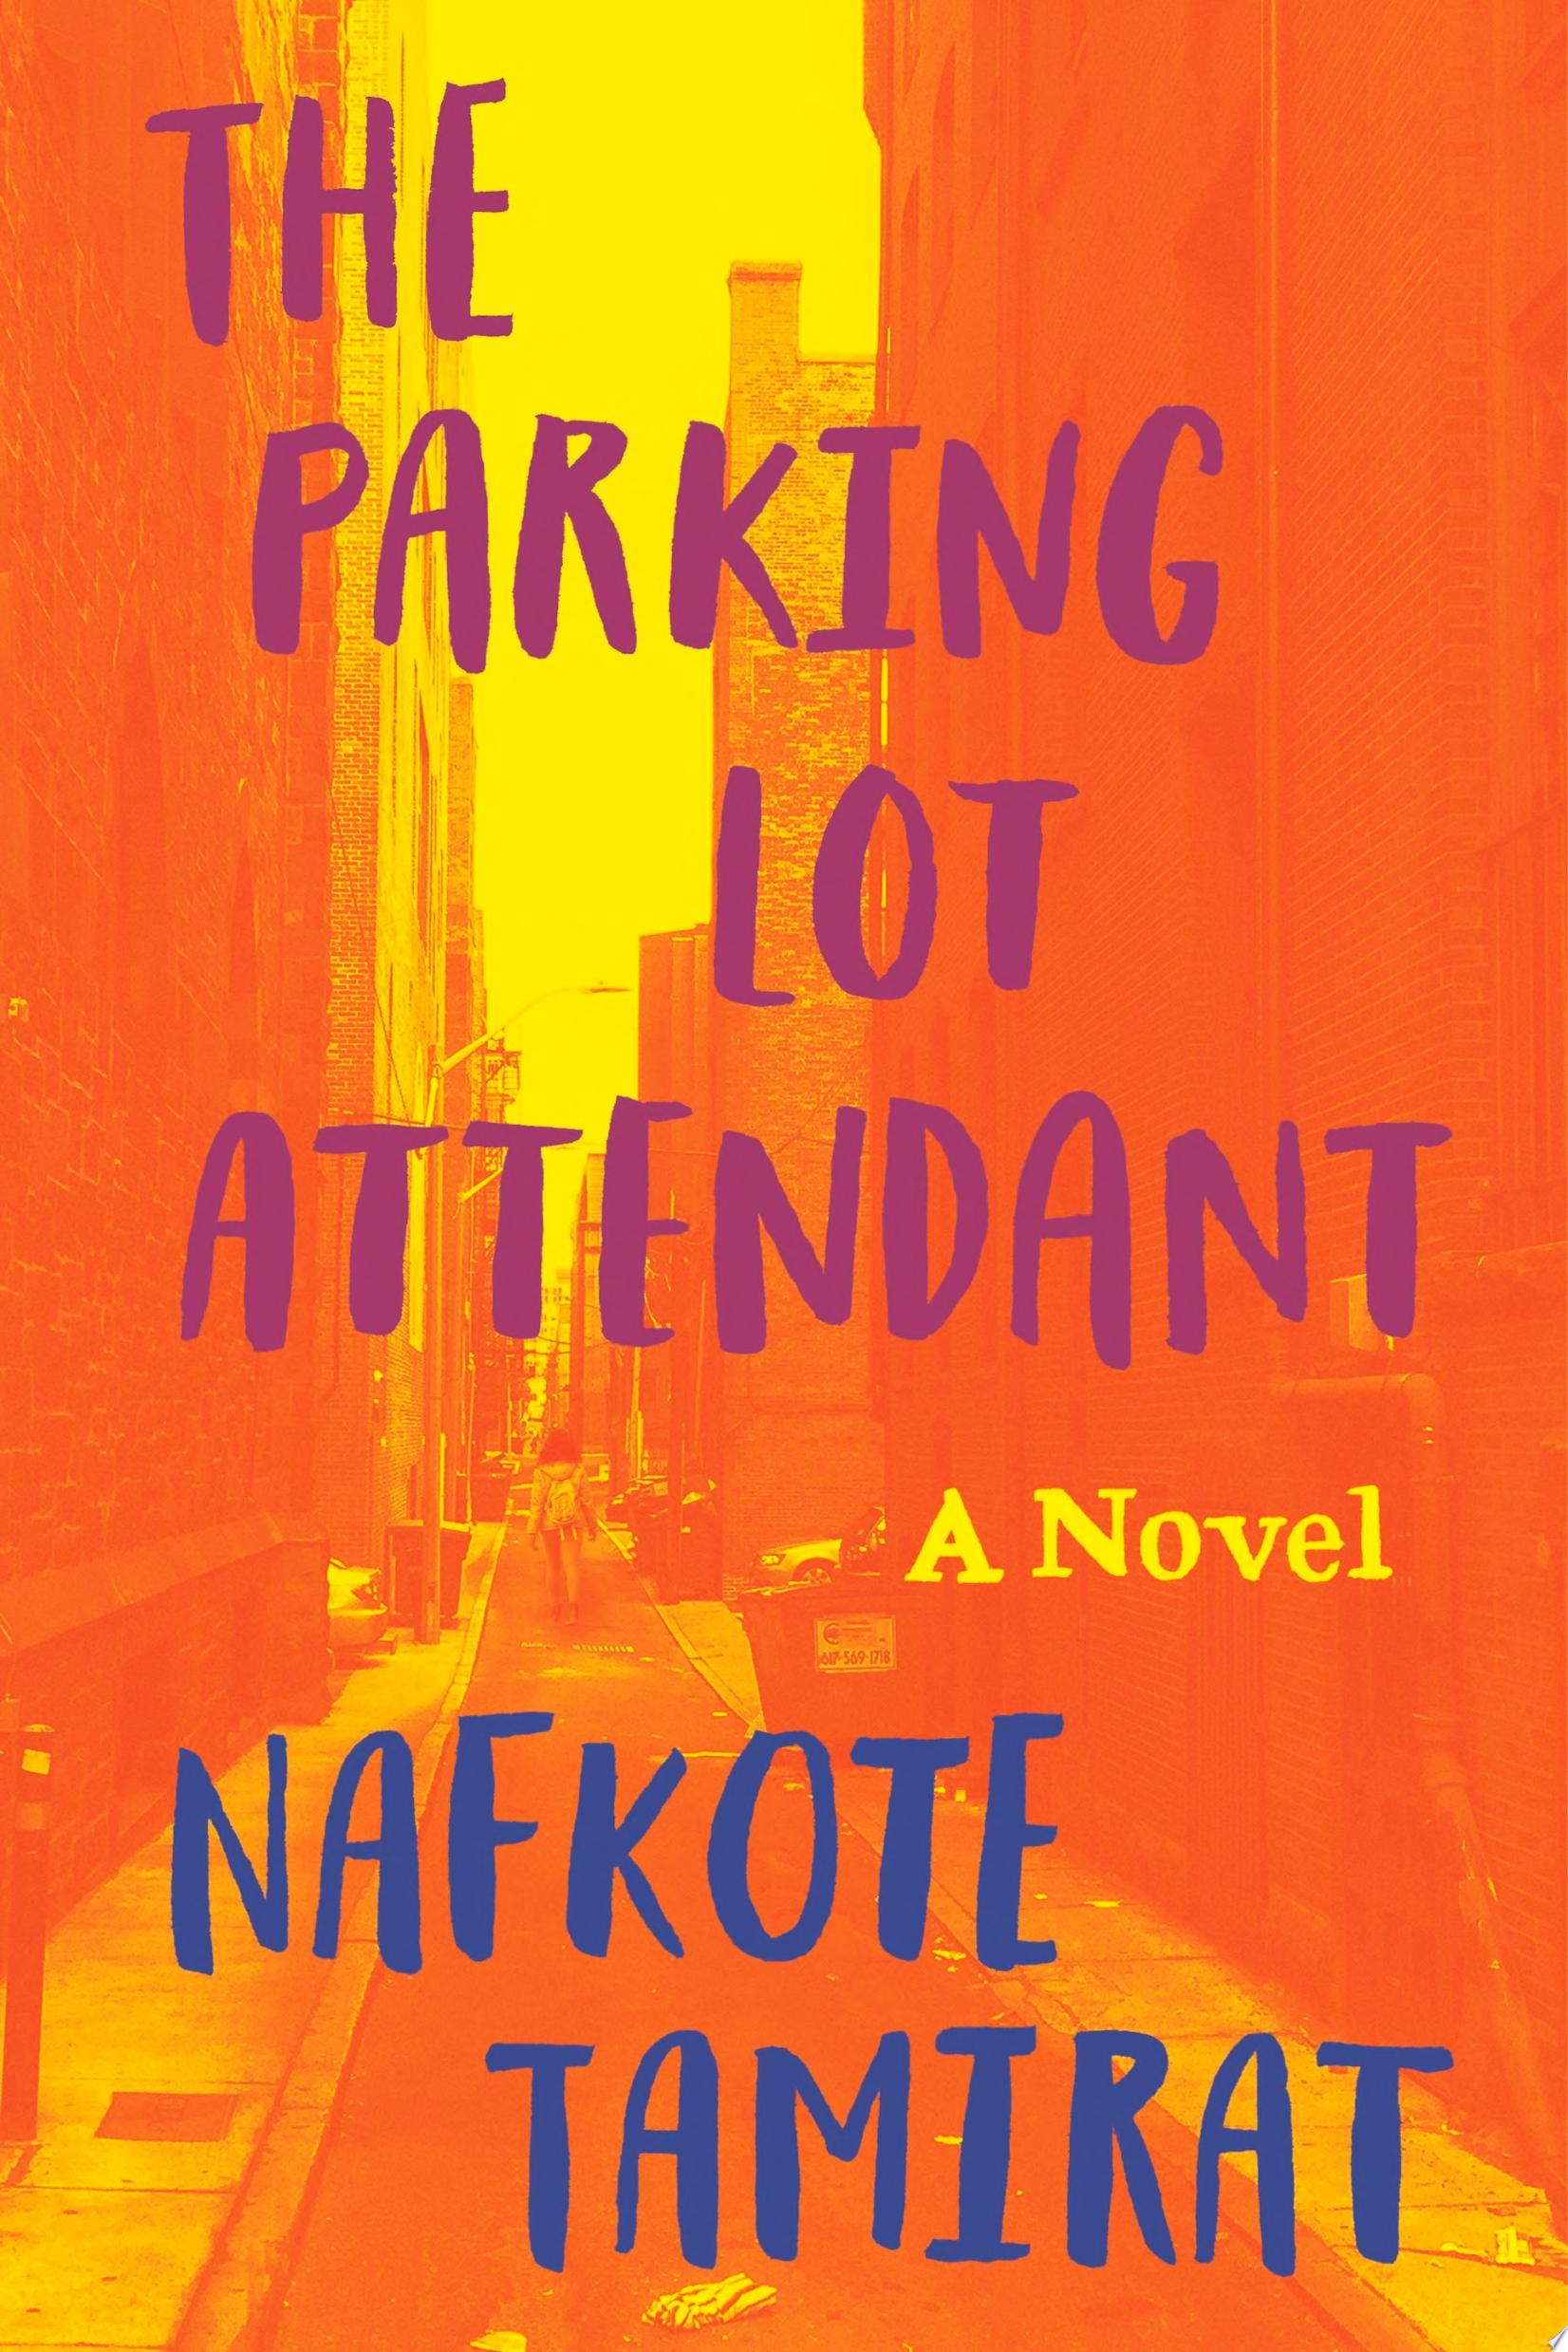 Image for "The Parking Lot Attendant"